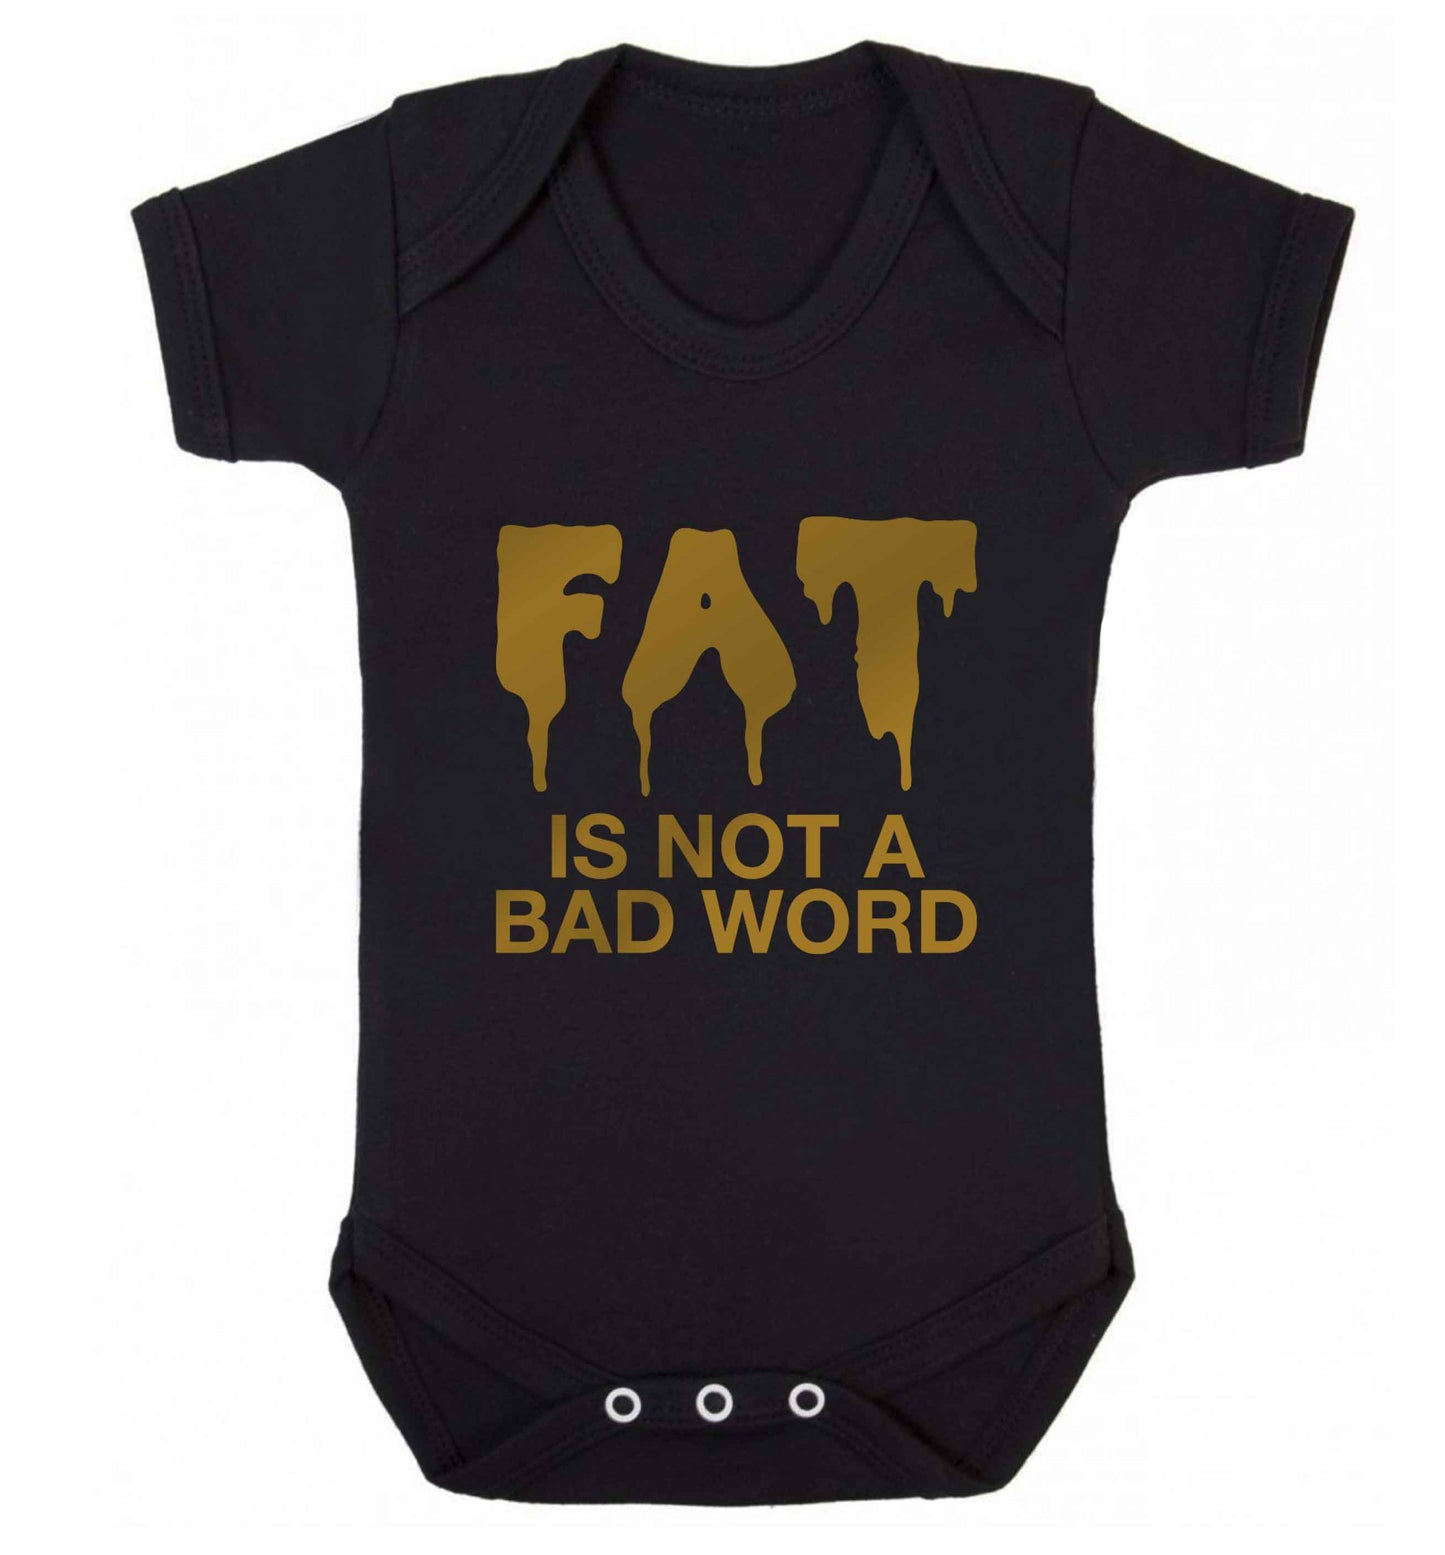 Fat is not a bad word baby vest black 18-24 months